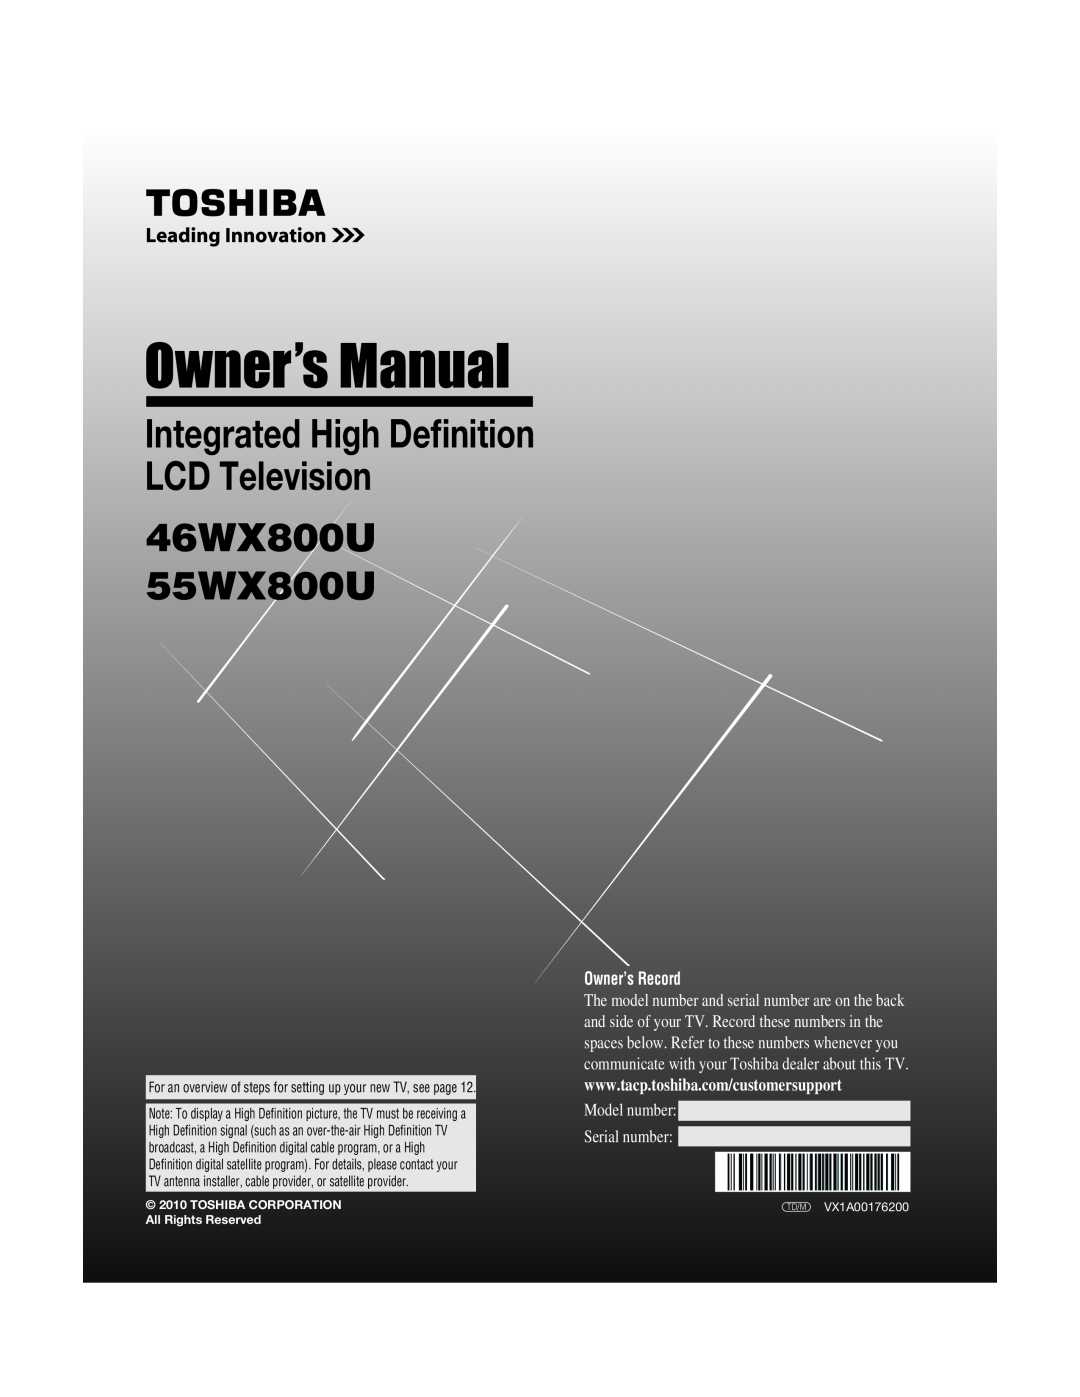 Toshiba manual 46WX800U 55WX800U, Integrated High Deﬁnition LCD Television, Owner’s Record, Model number Serial number 